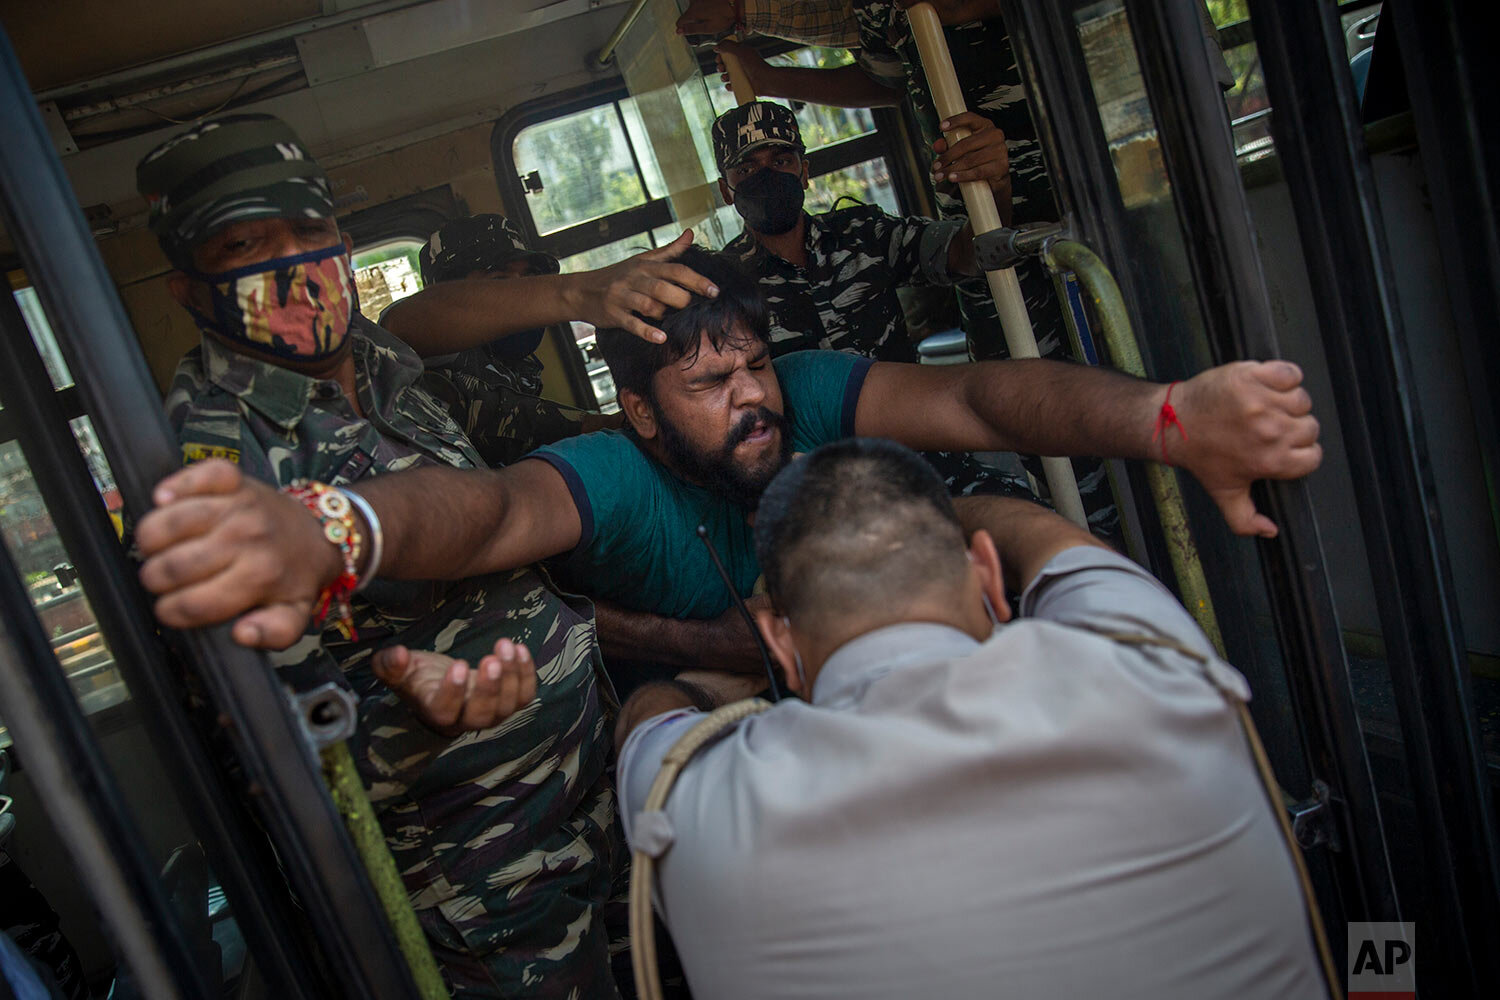  A Congress party supporter is pushed inside a bus as he is being detained during a protest against repeated hike of fuel and cooking gas prices in New Delhi, India, Thursday, Sept. 2, 2021. (AP Photo/Altaf Qadri) 